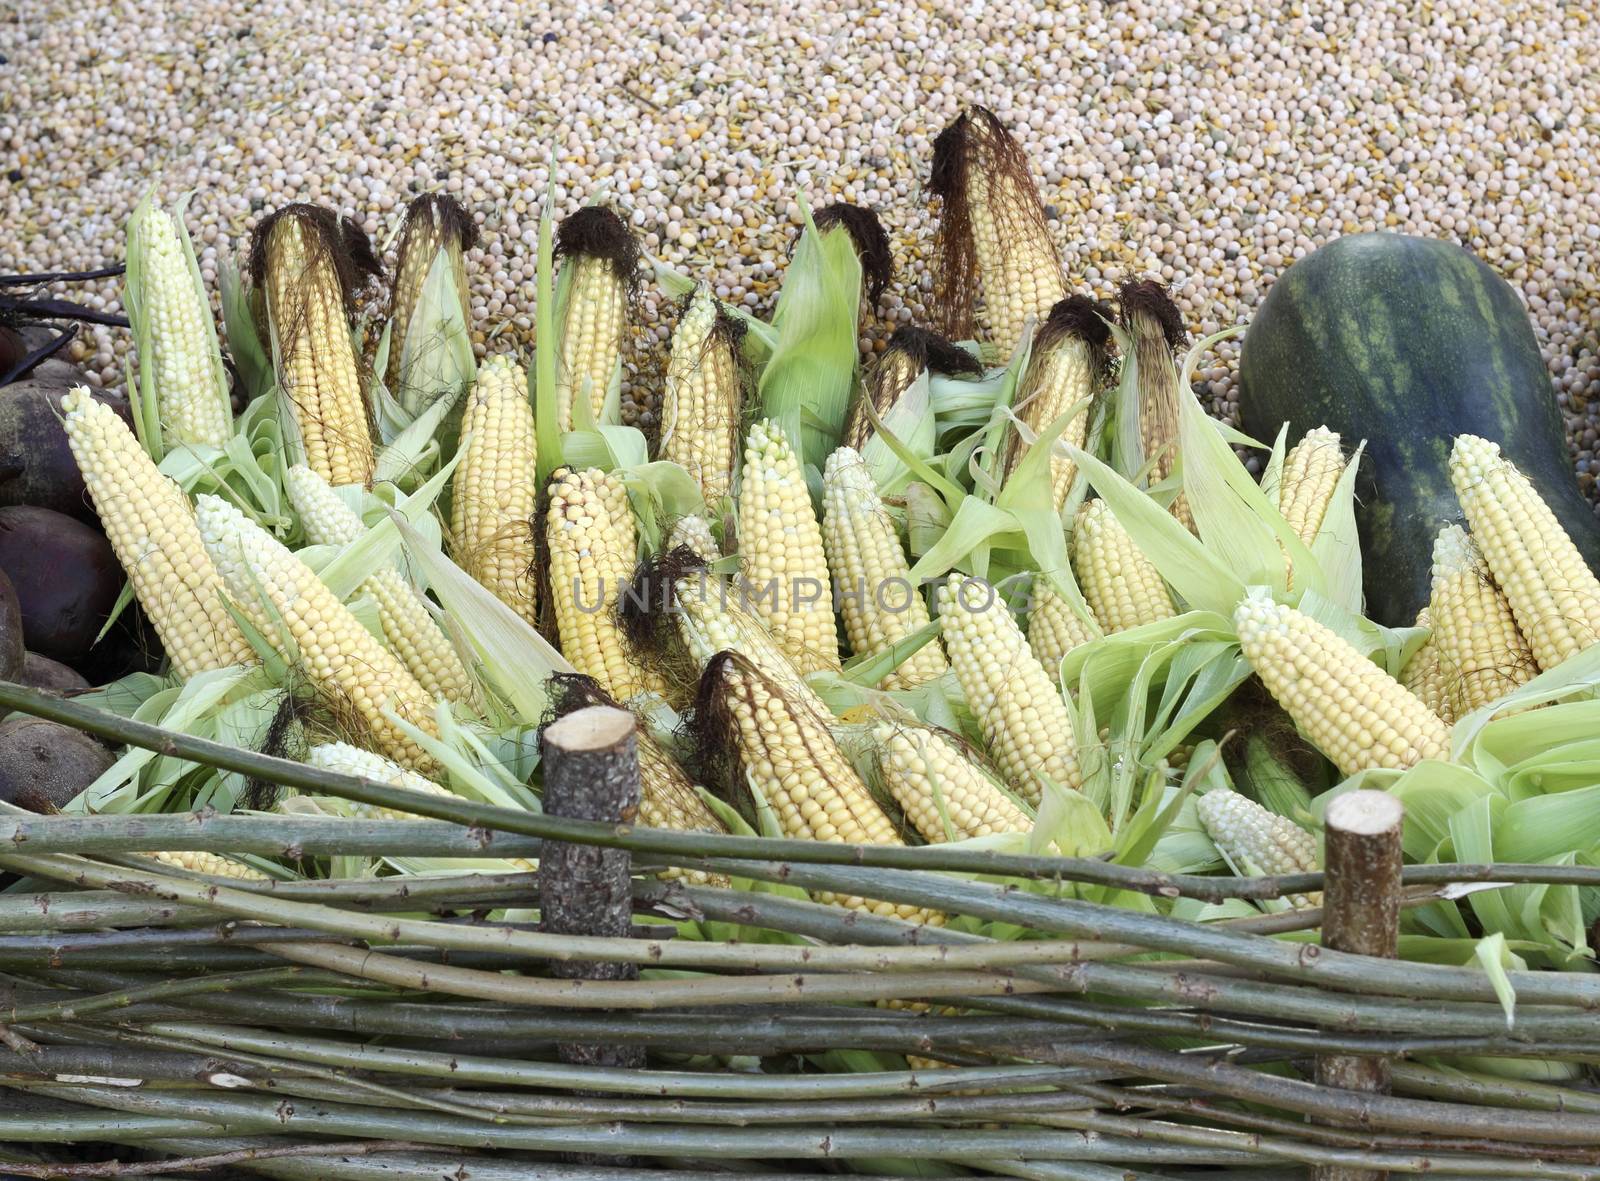 Corn cobs by openas